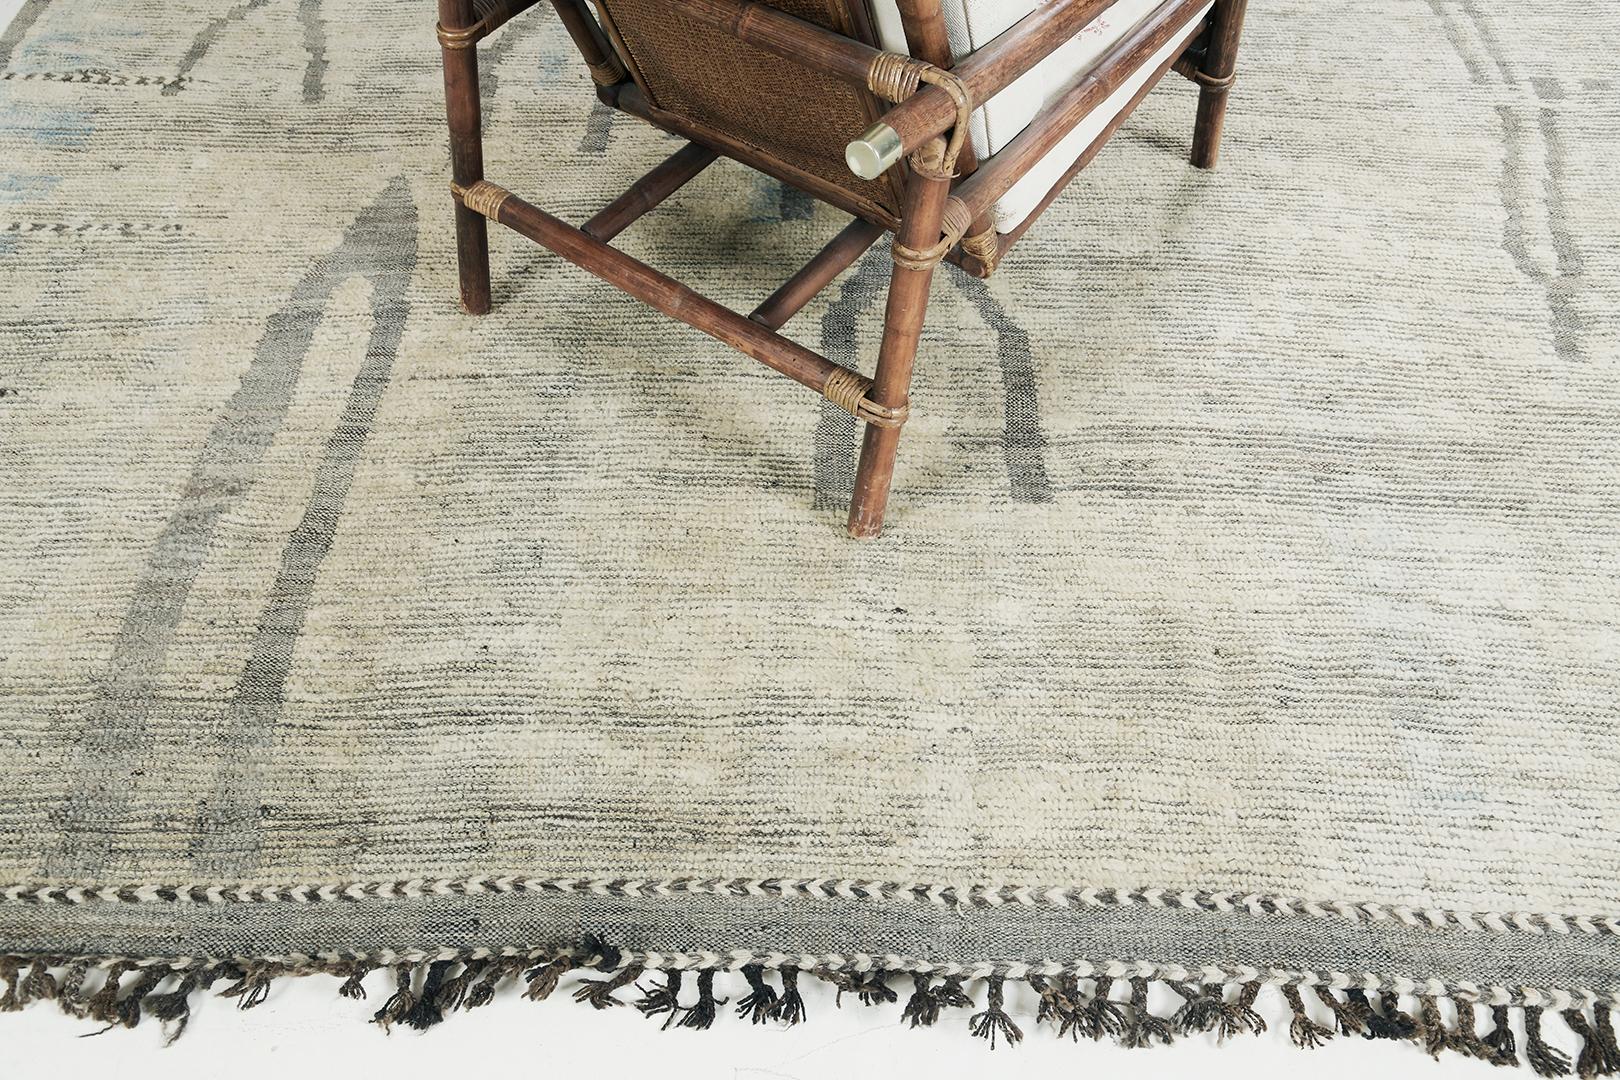 Rikasa is a luxurious wool with amorphous shapes in subtle gradations of tan, ivory and taupe. Its embossed handwoven wool features a series of free-spirited rugs that feels innately soft underfoot and is enhanced by extraordinary, valiant designs